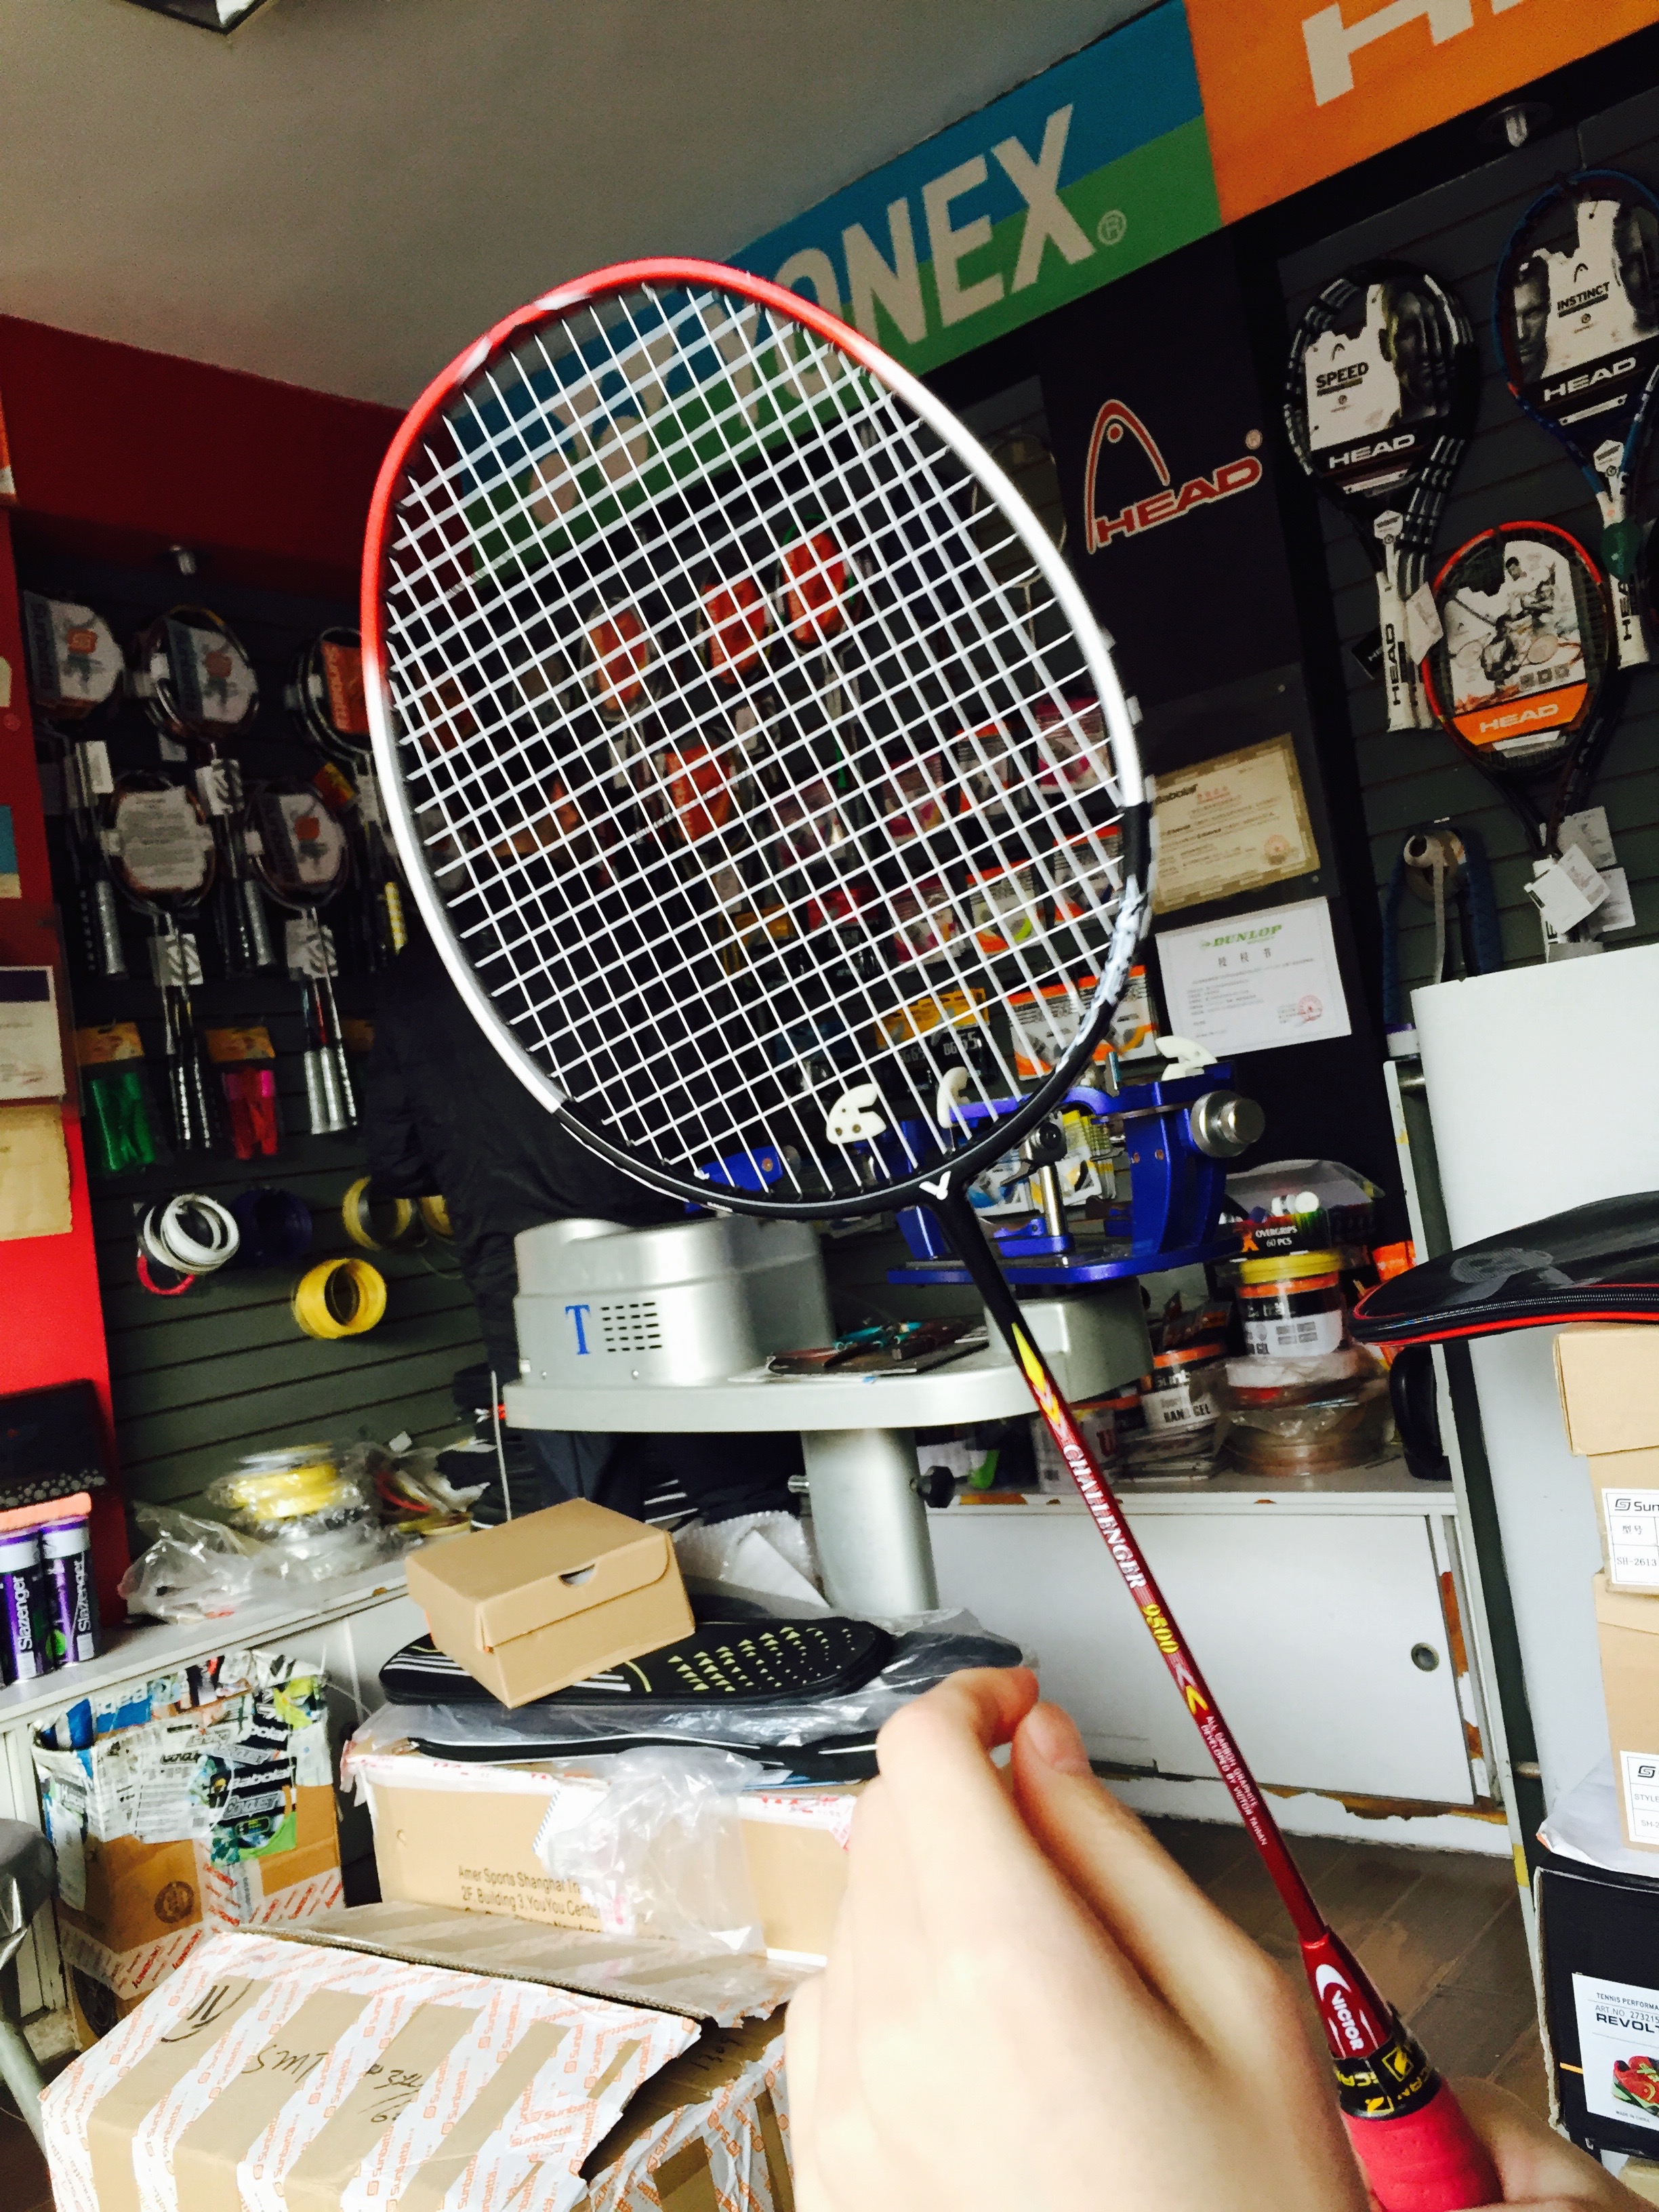 I went with my friend Xiao He to get his rackets restrung a few weeks ago. I got to watch the whole process. 